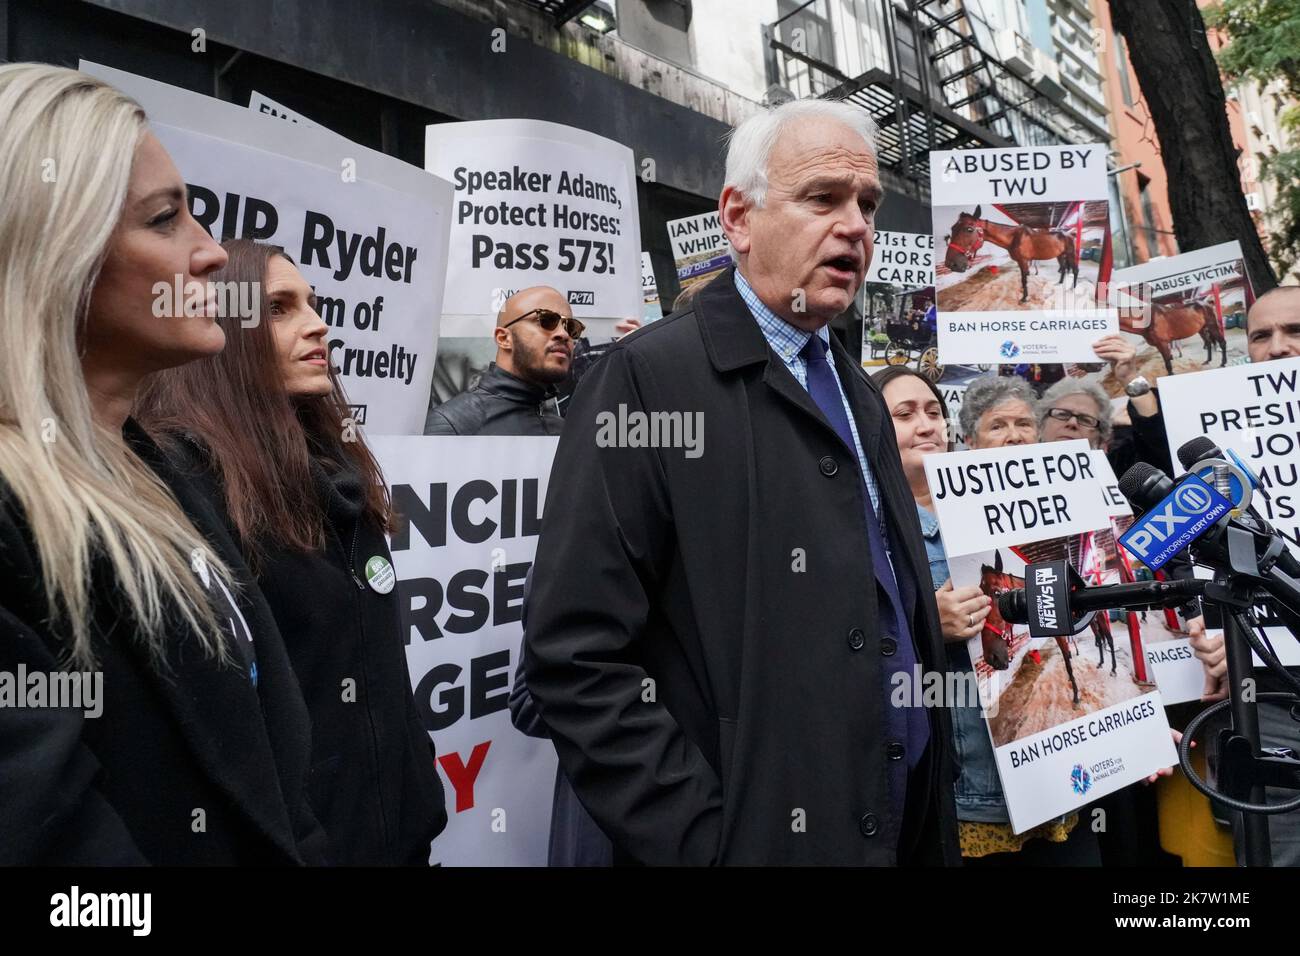 https://c8.alamy.com/comp/2K7W1ME/robert-holden-new-york-city-council-and-sponsor-of-bill-573-speaks-as-protesters-gather-for-a-memorial-for-ryder-a-nyc-carriage-horse-at-the-place-where-he-collapsed-and-died-soon-after-ryder-is-one-of-the-many-new-york-city-carriage-horses-that-have-collapsed-on-the-congested-new-york-city-streets-in-the-past-few-years-council-members-have-introduced-a-bill-to-replace-carriage-horses-with-antique-electric-cars-photo-by-catherine-nance-sopa-imagessipa-usa-2K7W1ME.jpg